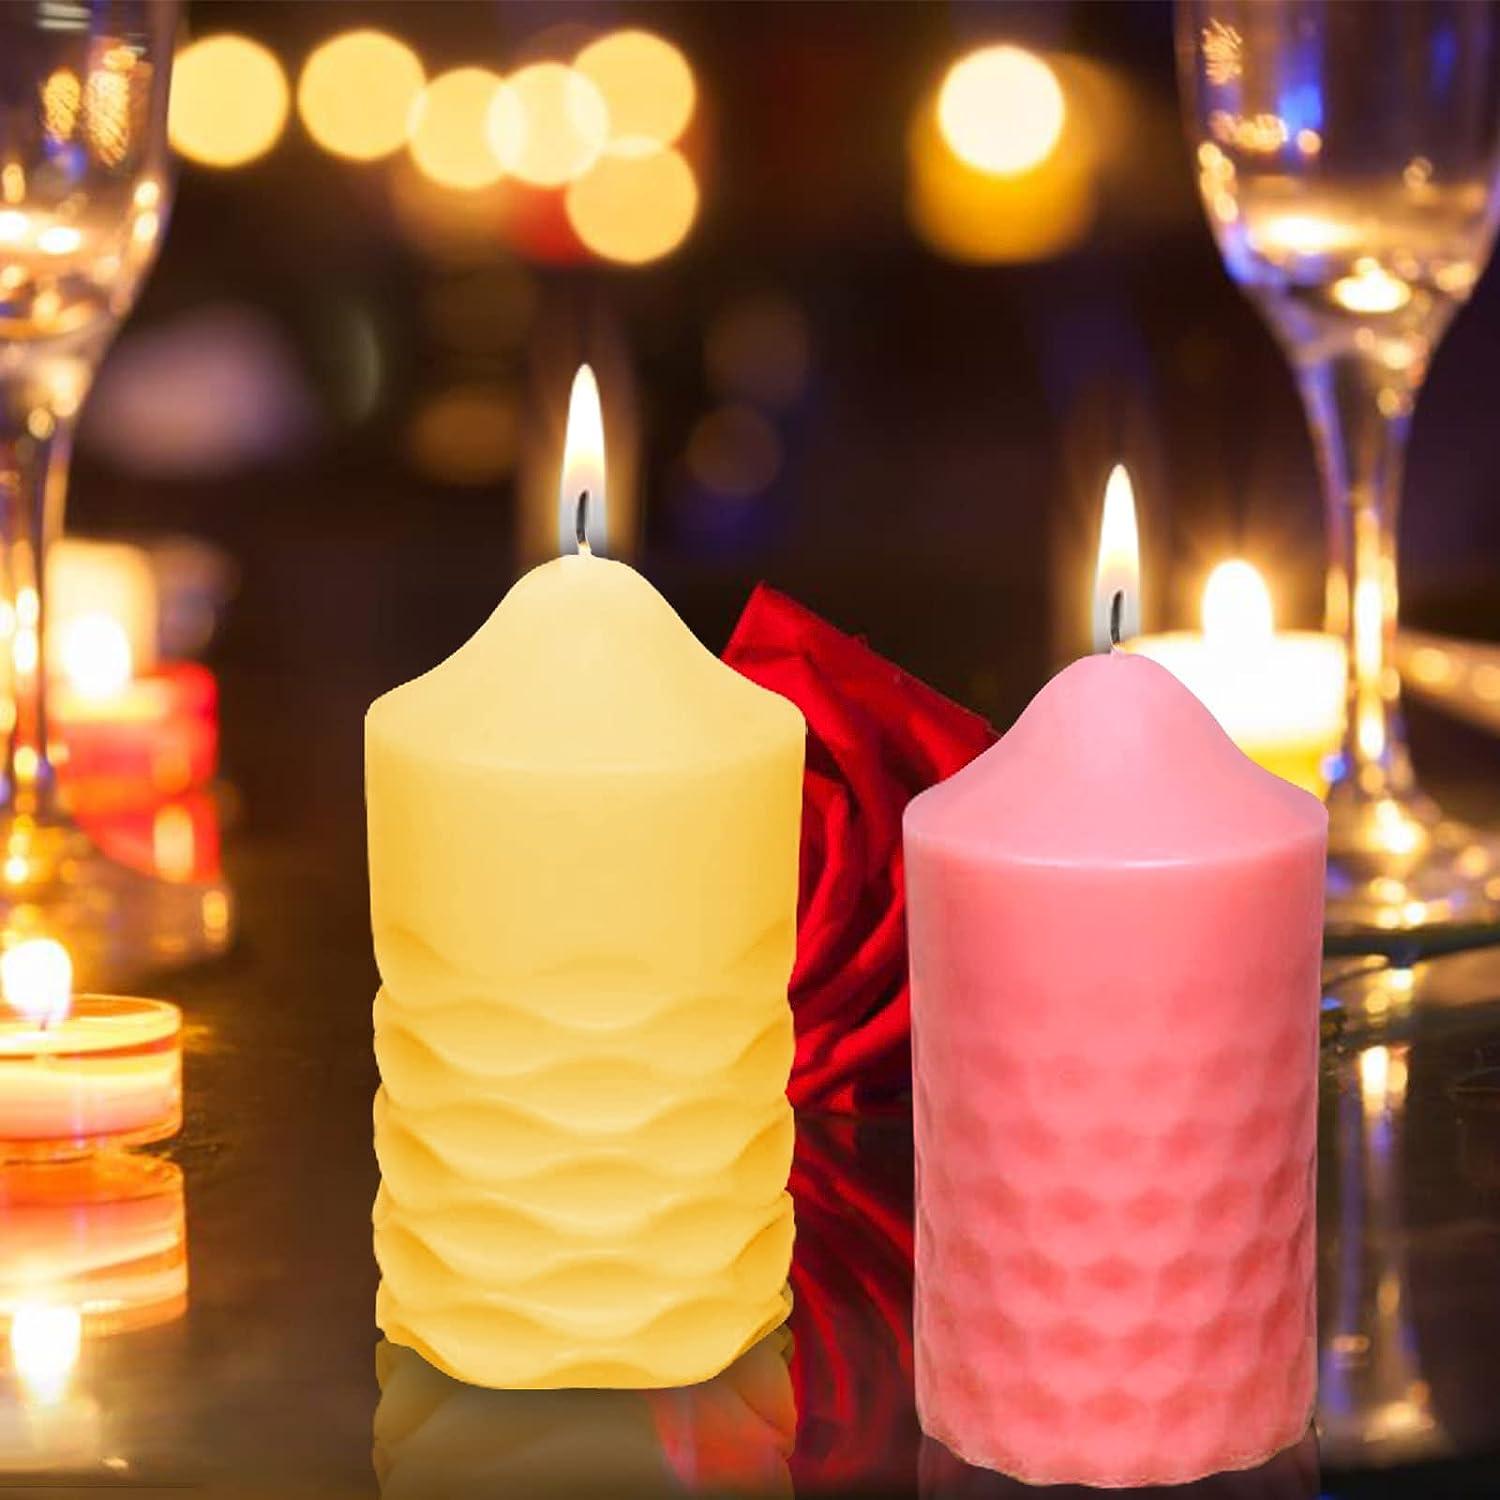 HUAKENER Candle Molds Silicone Wavy Candle Mold and Rhombus Candle